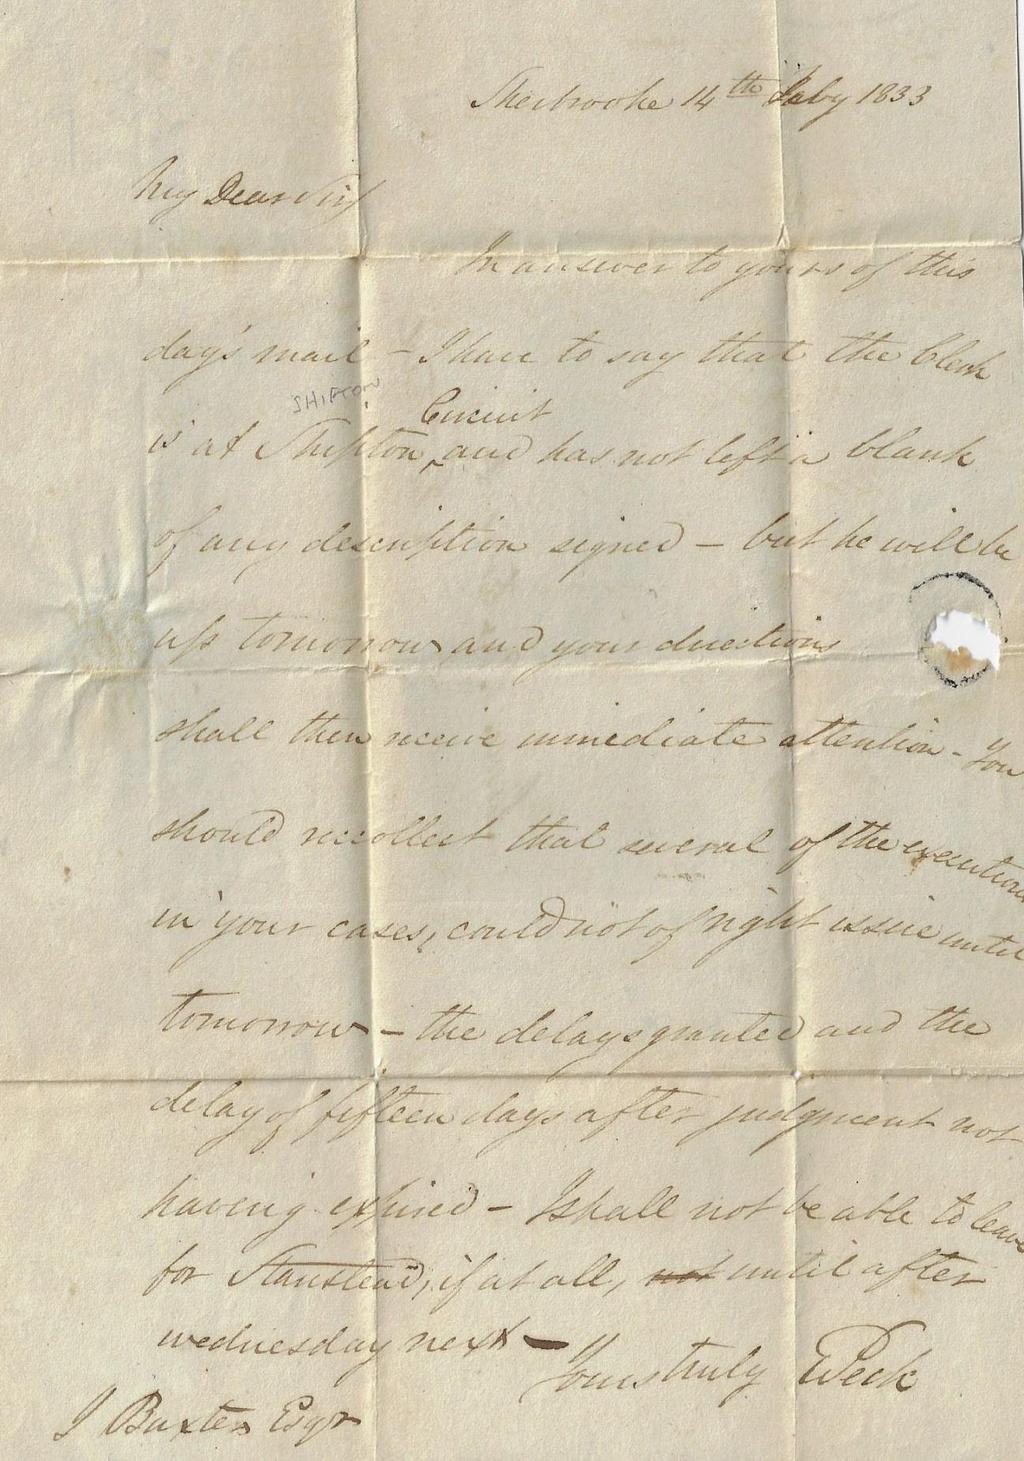 Item 323-08 Sherbrooke LC 1833, stampless folded letter from Ebenezer